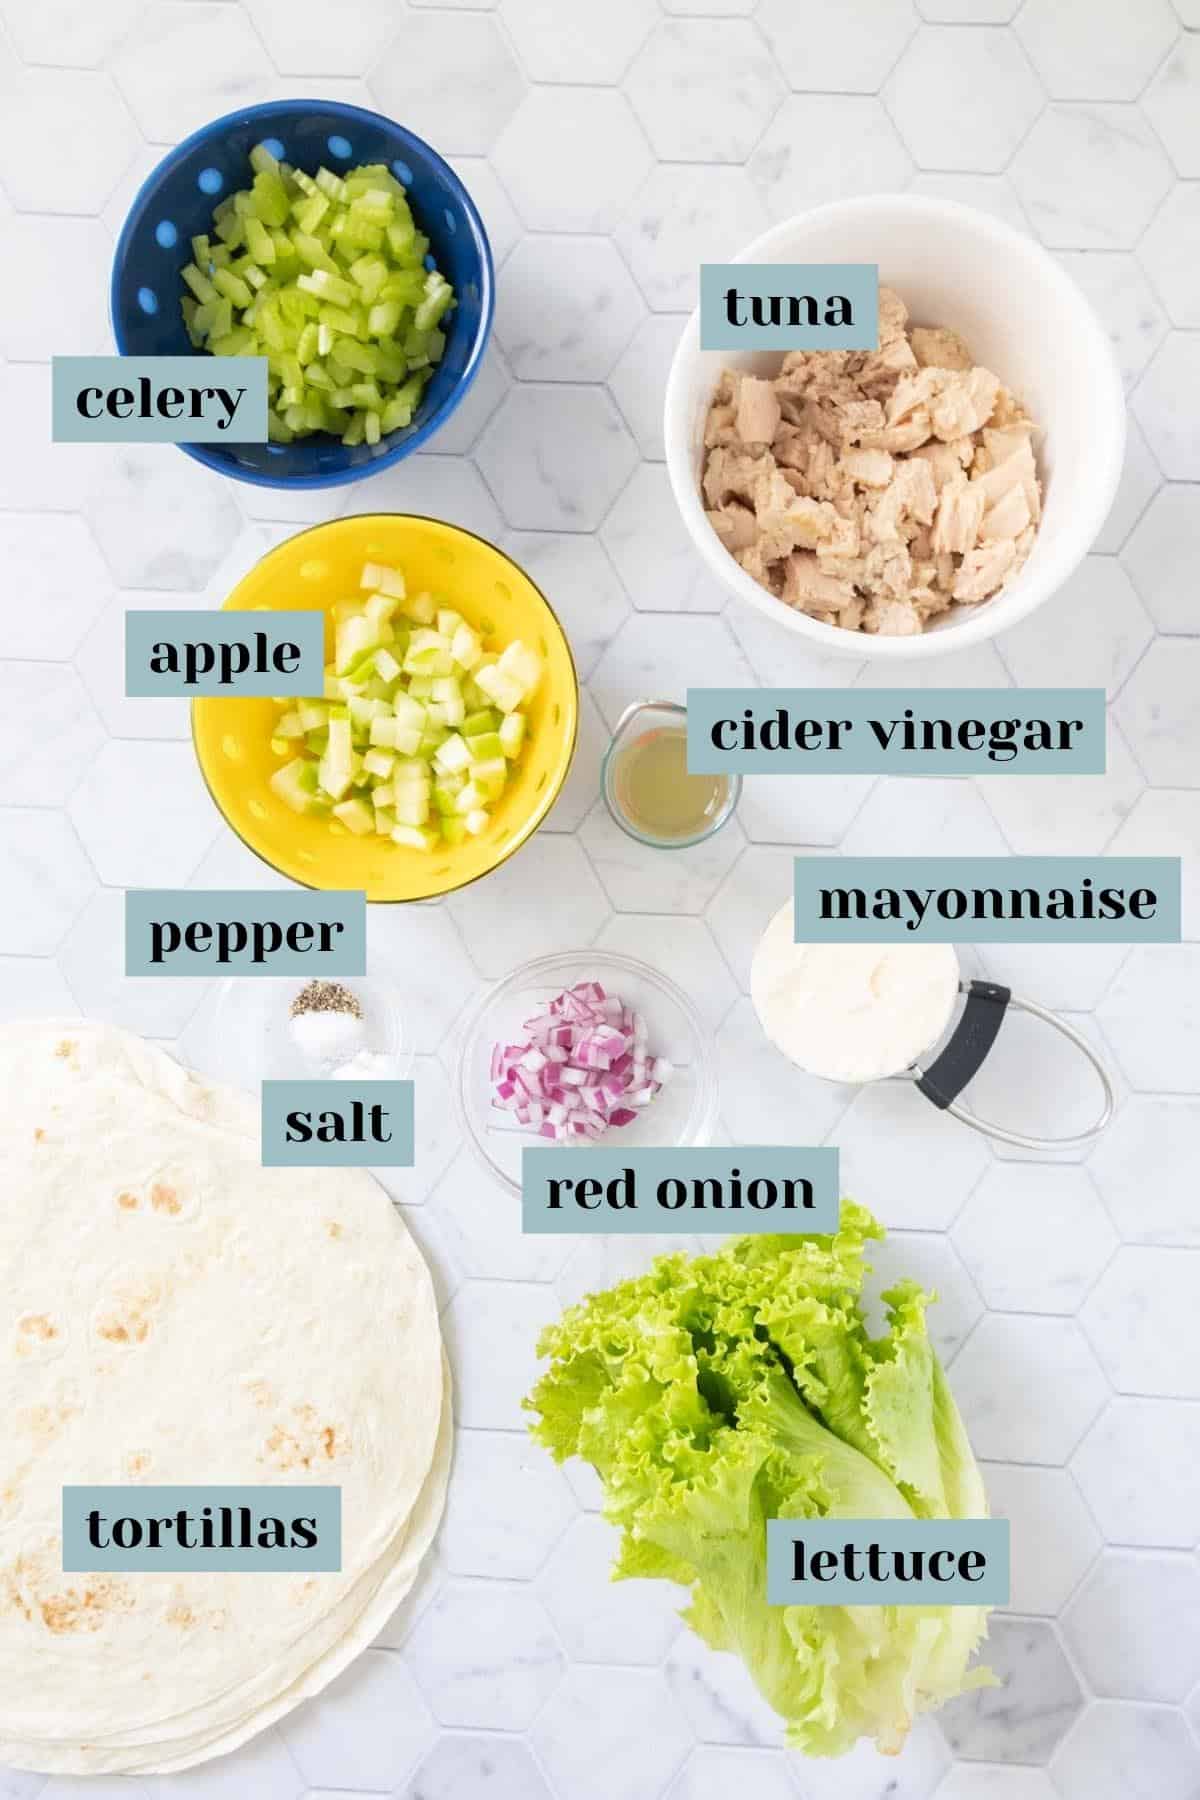 Ingredients for tuna wraps on a tile surface with labels.